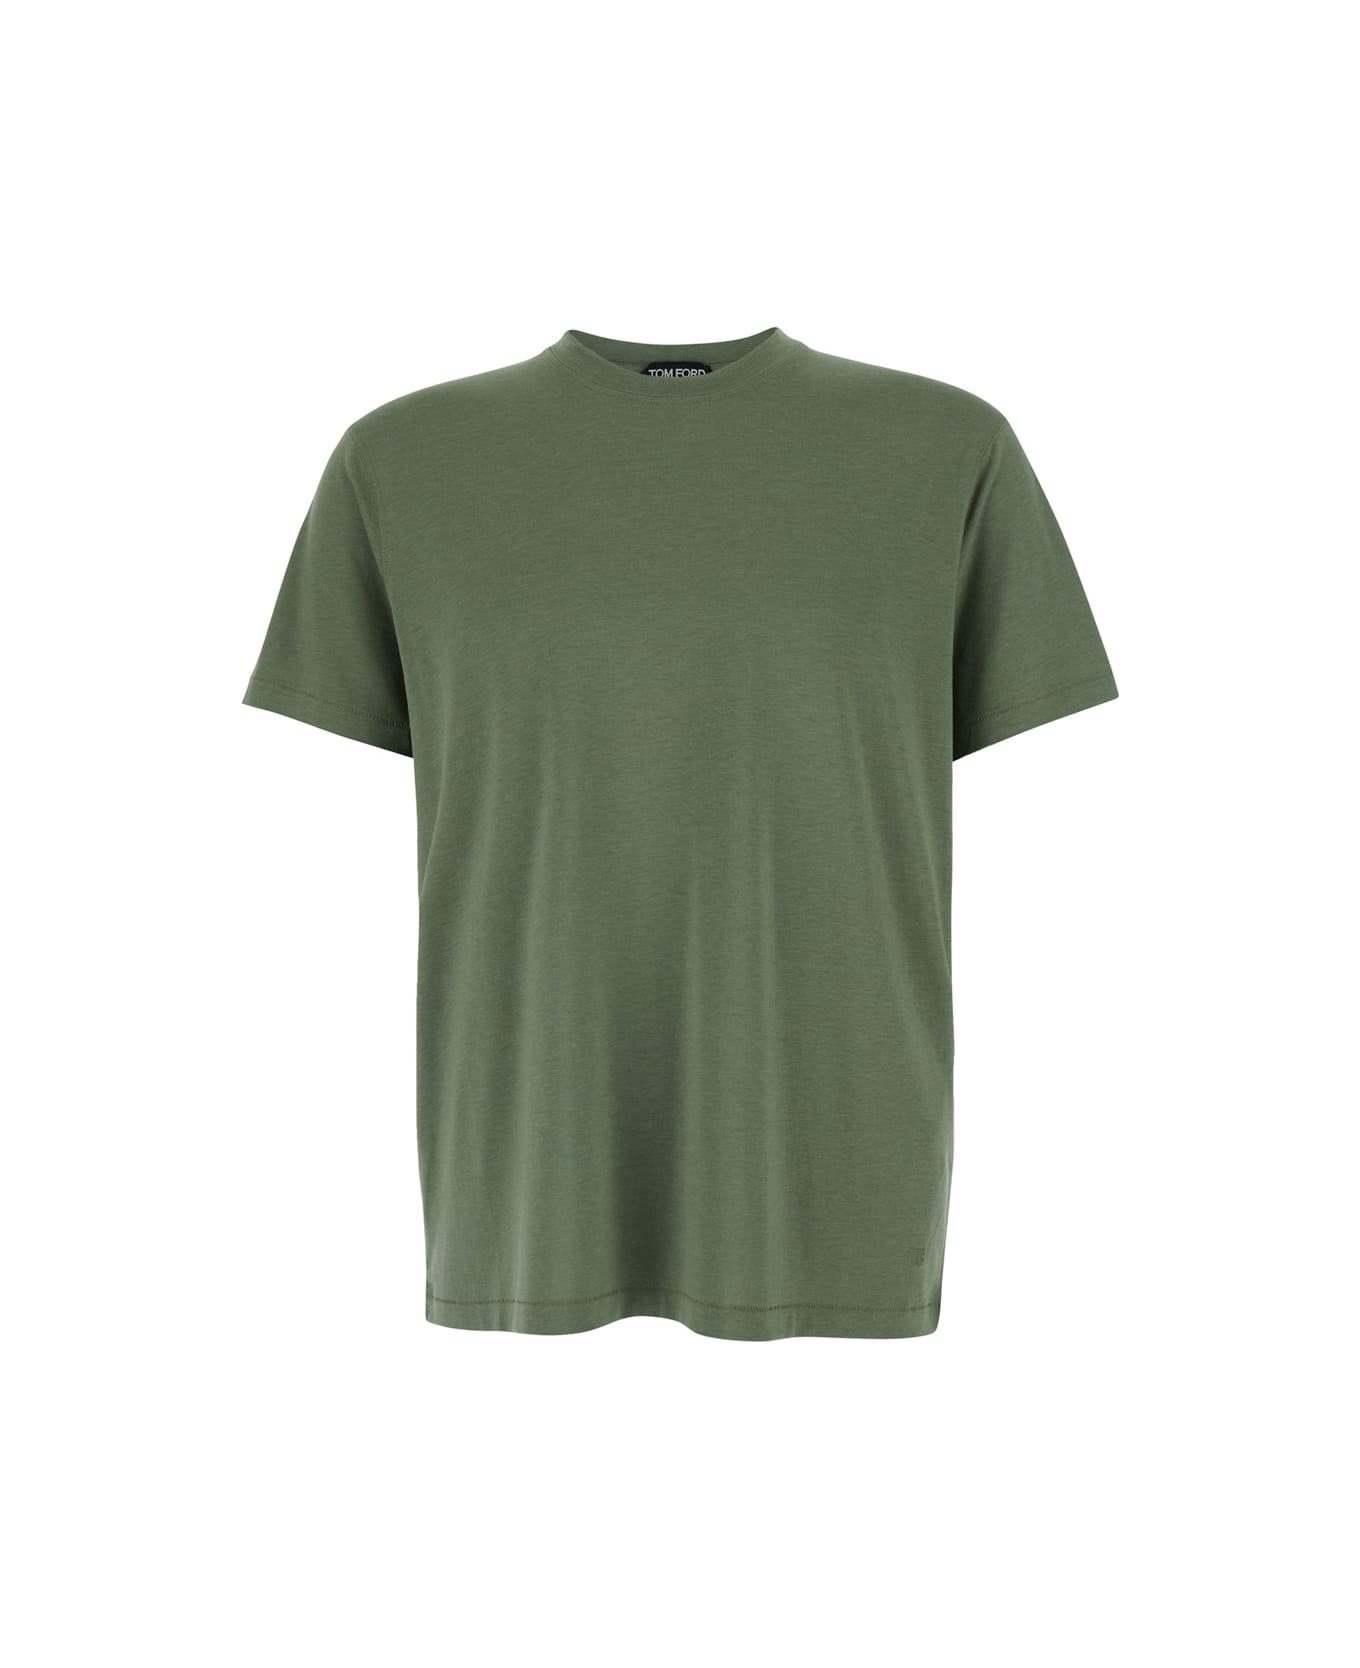 Tom Ford Green Crewneck T-shirt In Cotton Blend Man - Green シャツ